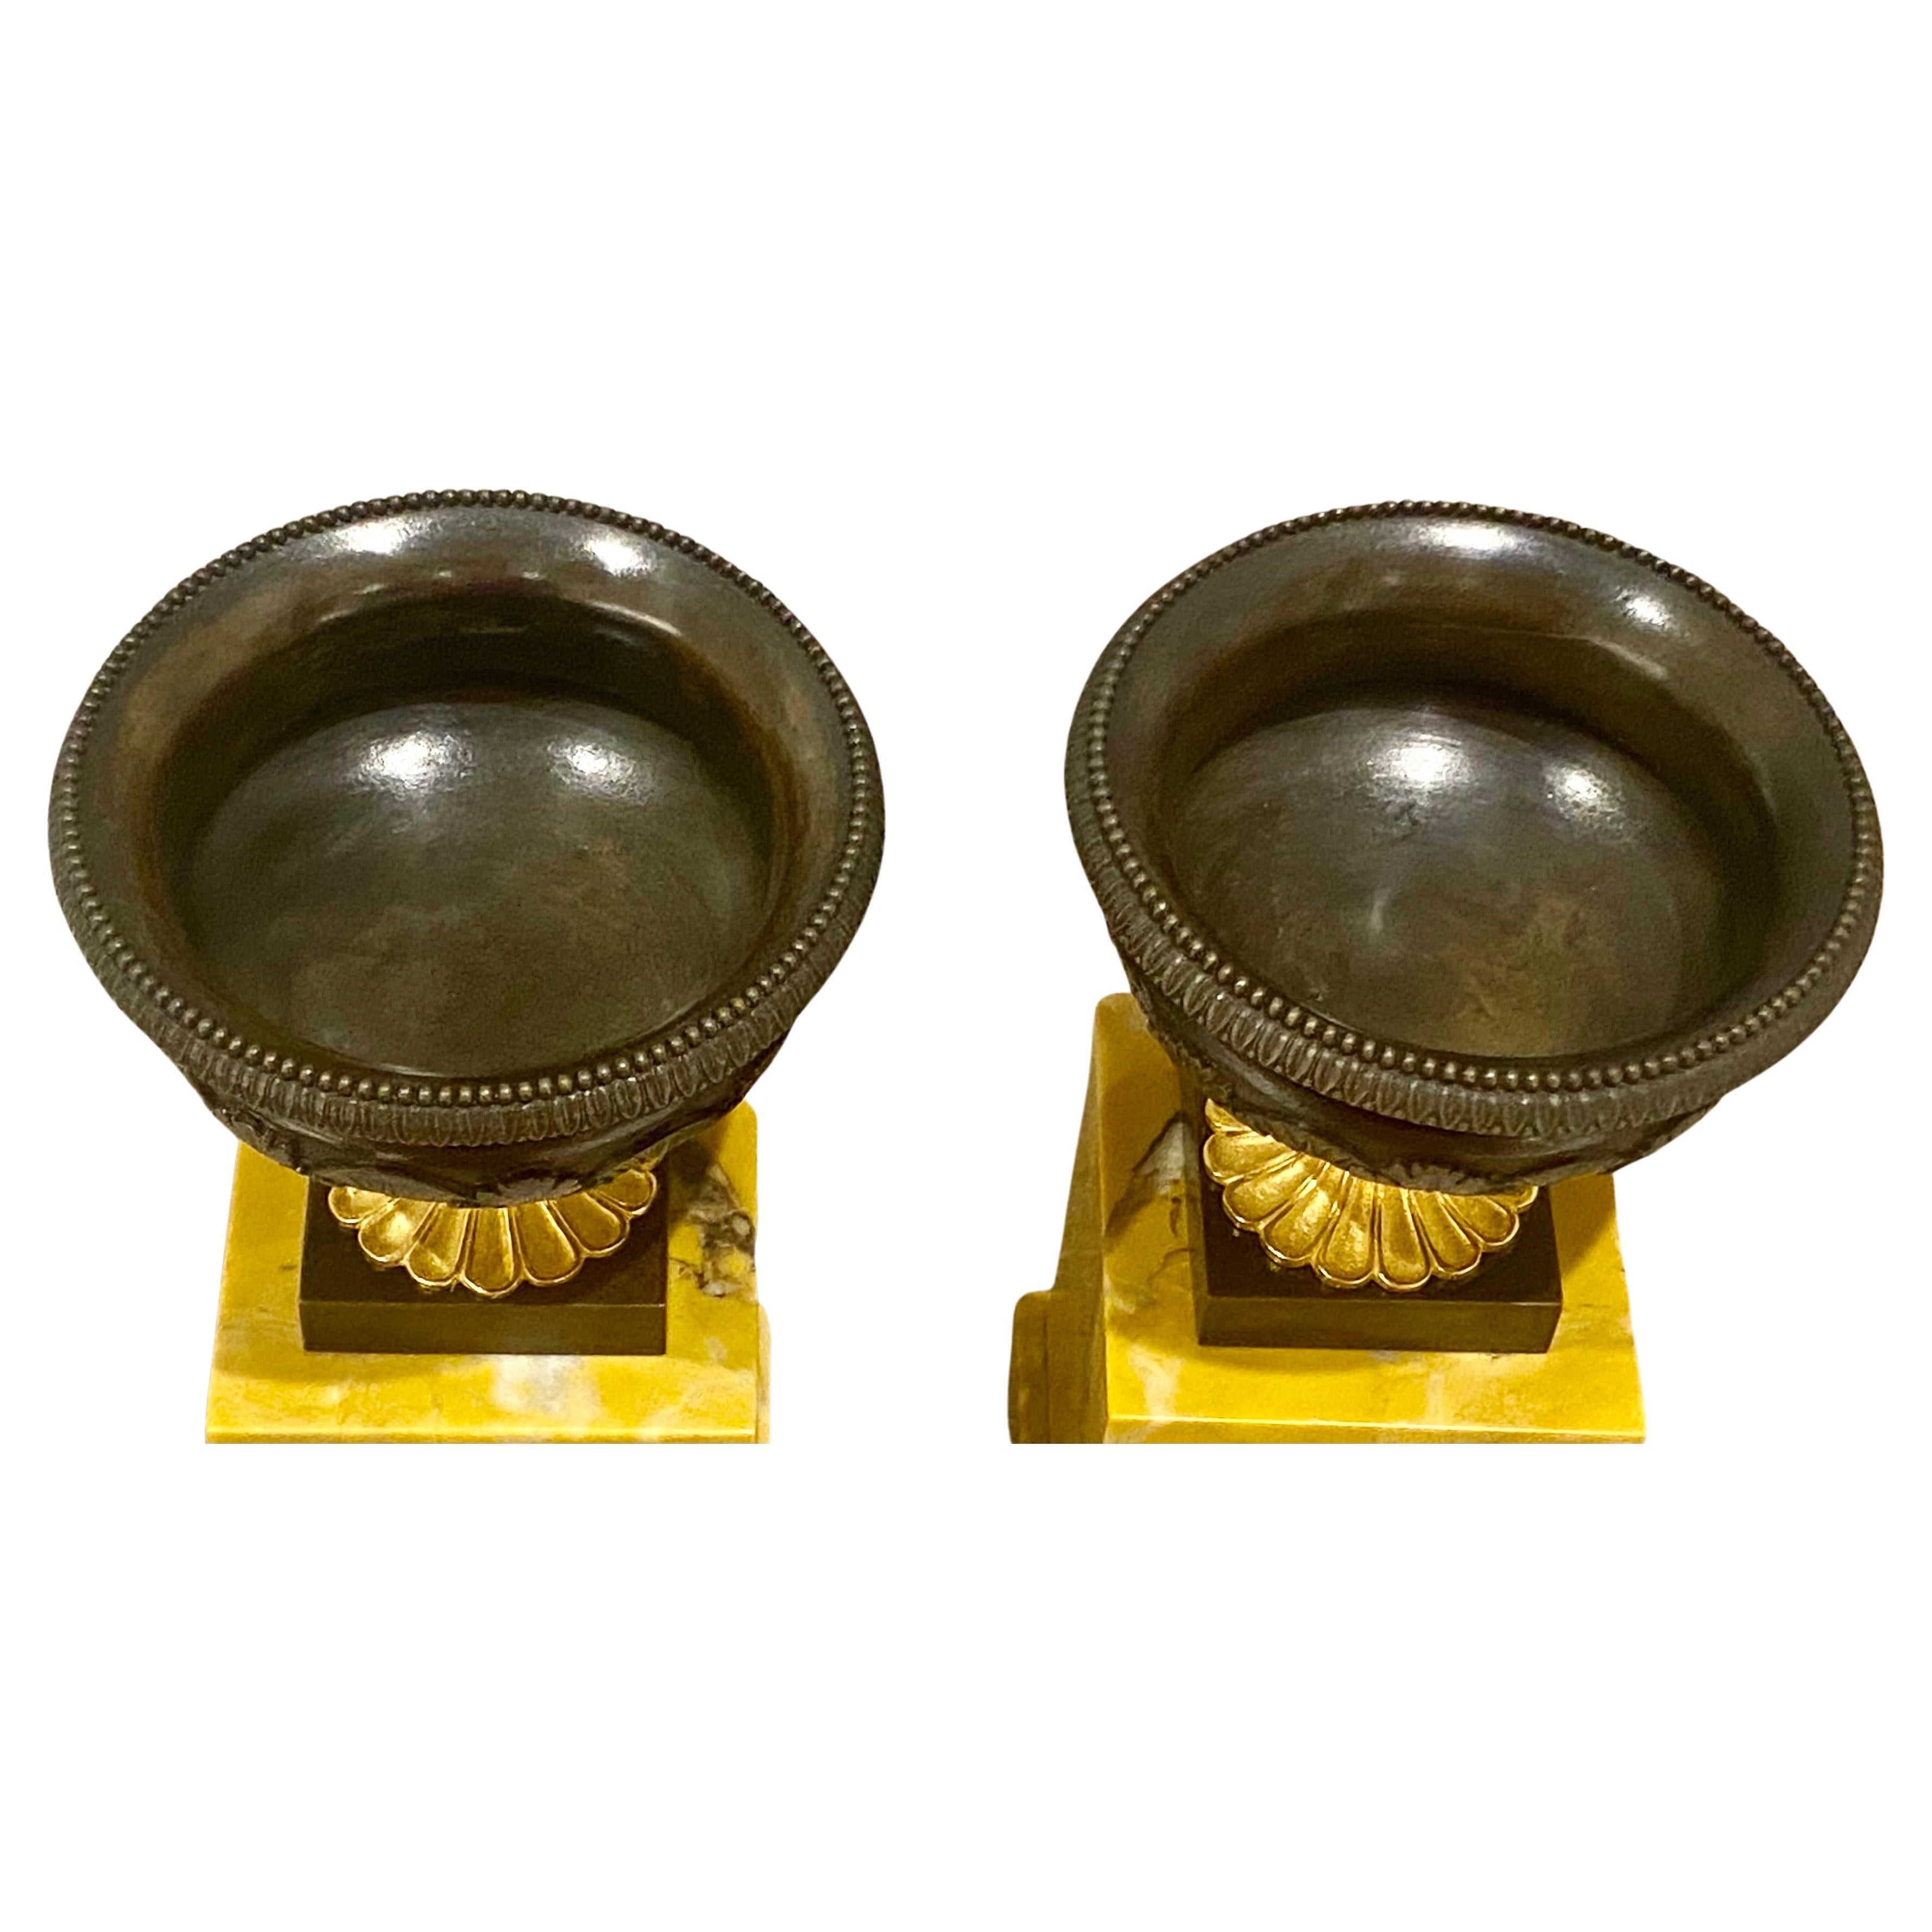 High Quality Pair of Regency Bronze & Sienna Marble Tazza circa 1820's For Sale 4